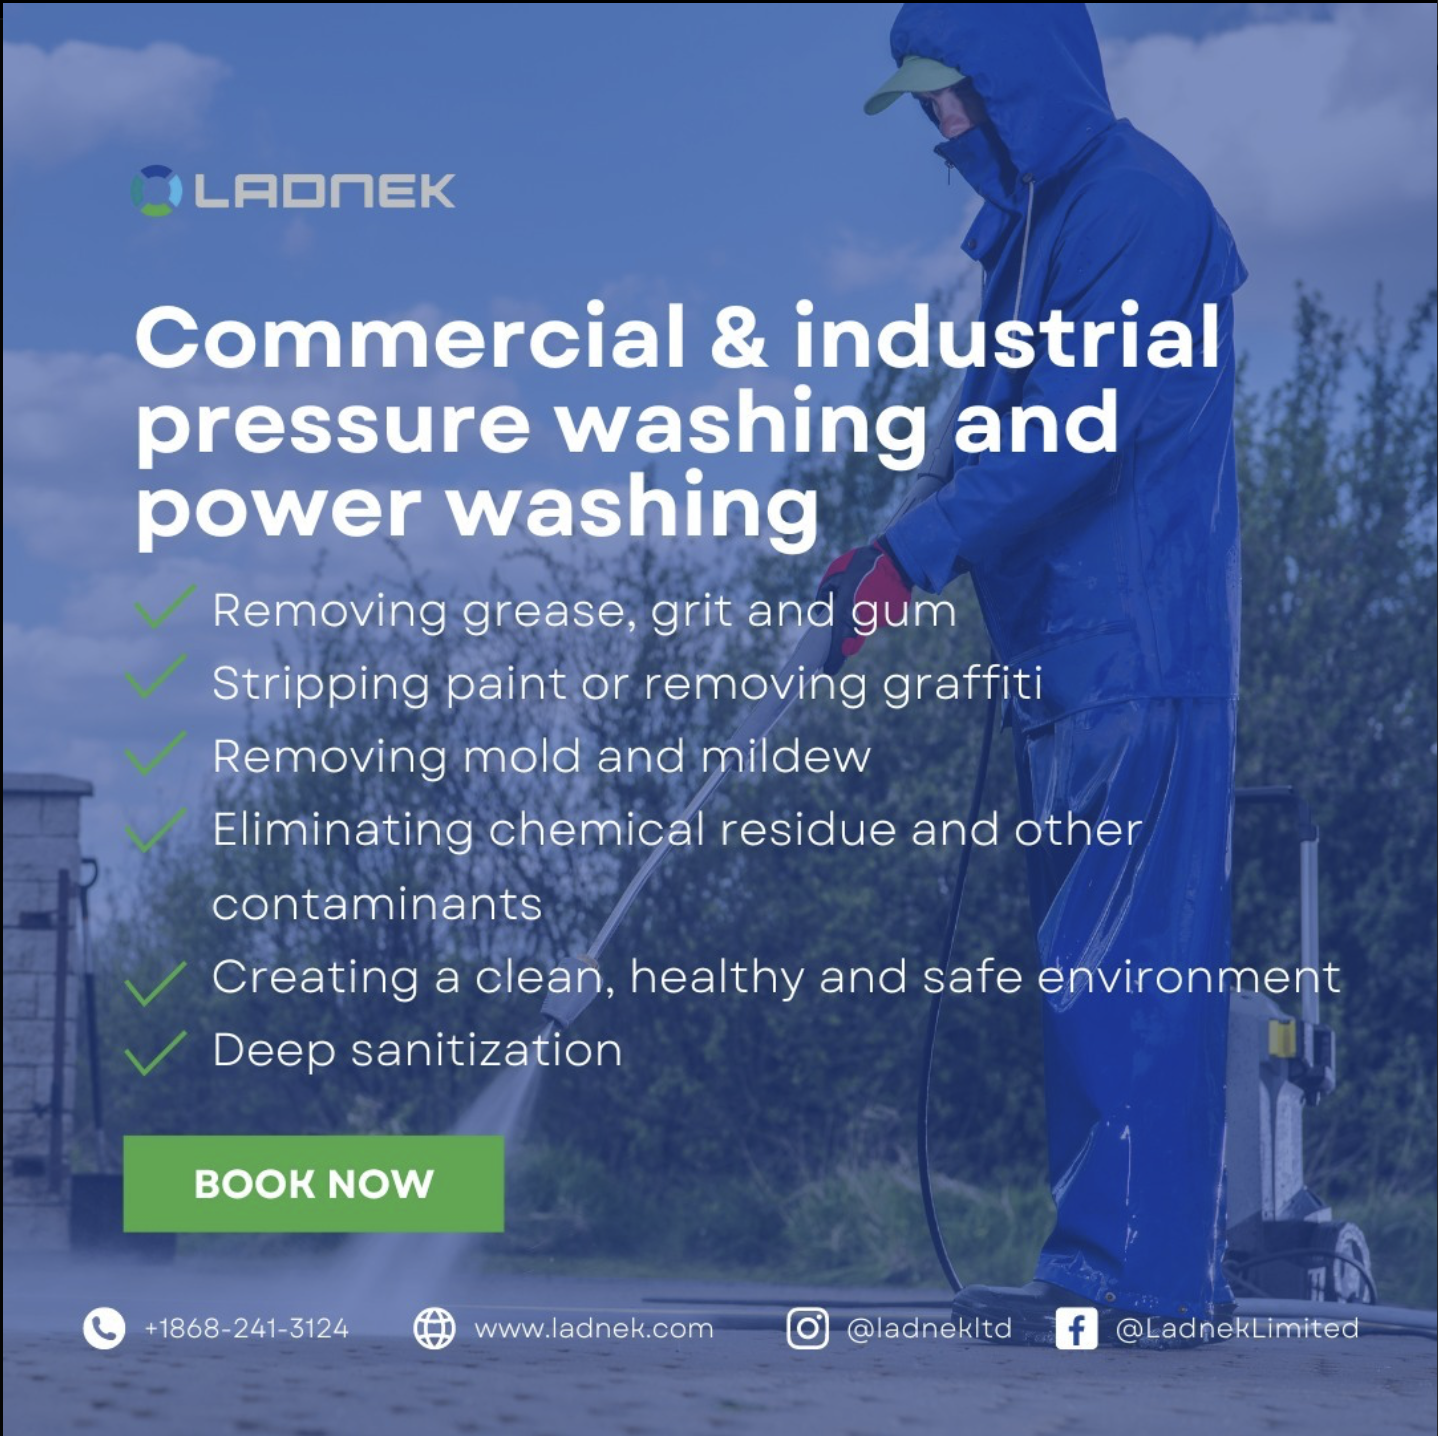 Commercial & industrial pressure washing and power cleaning services- ladnek